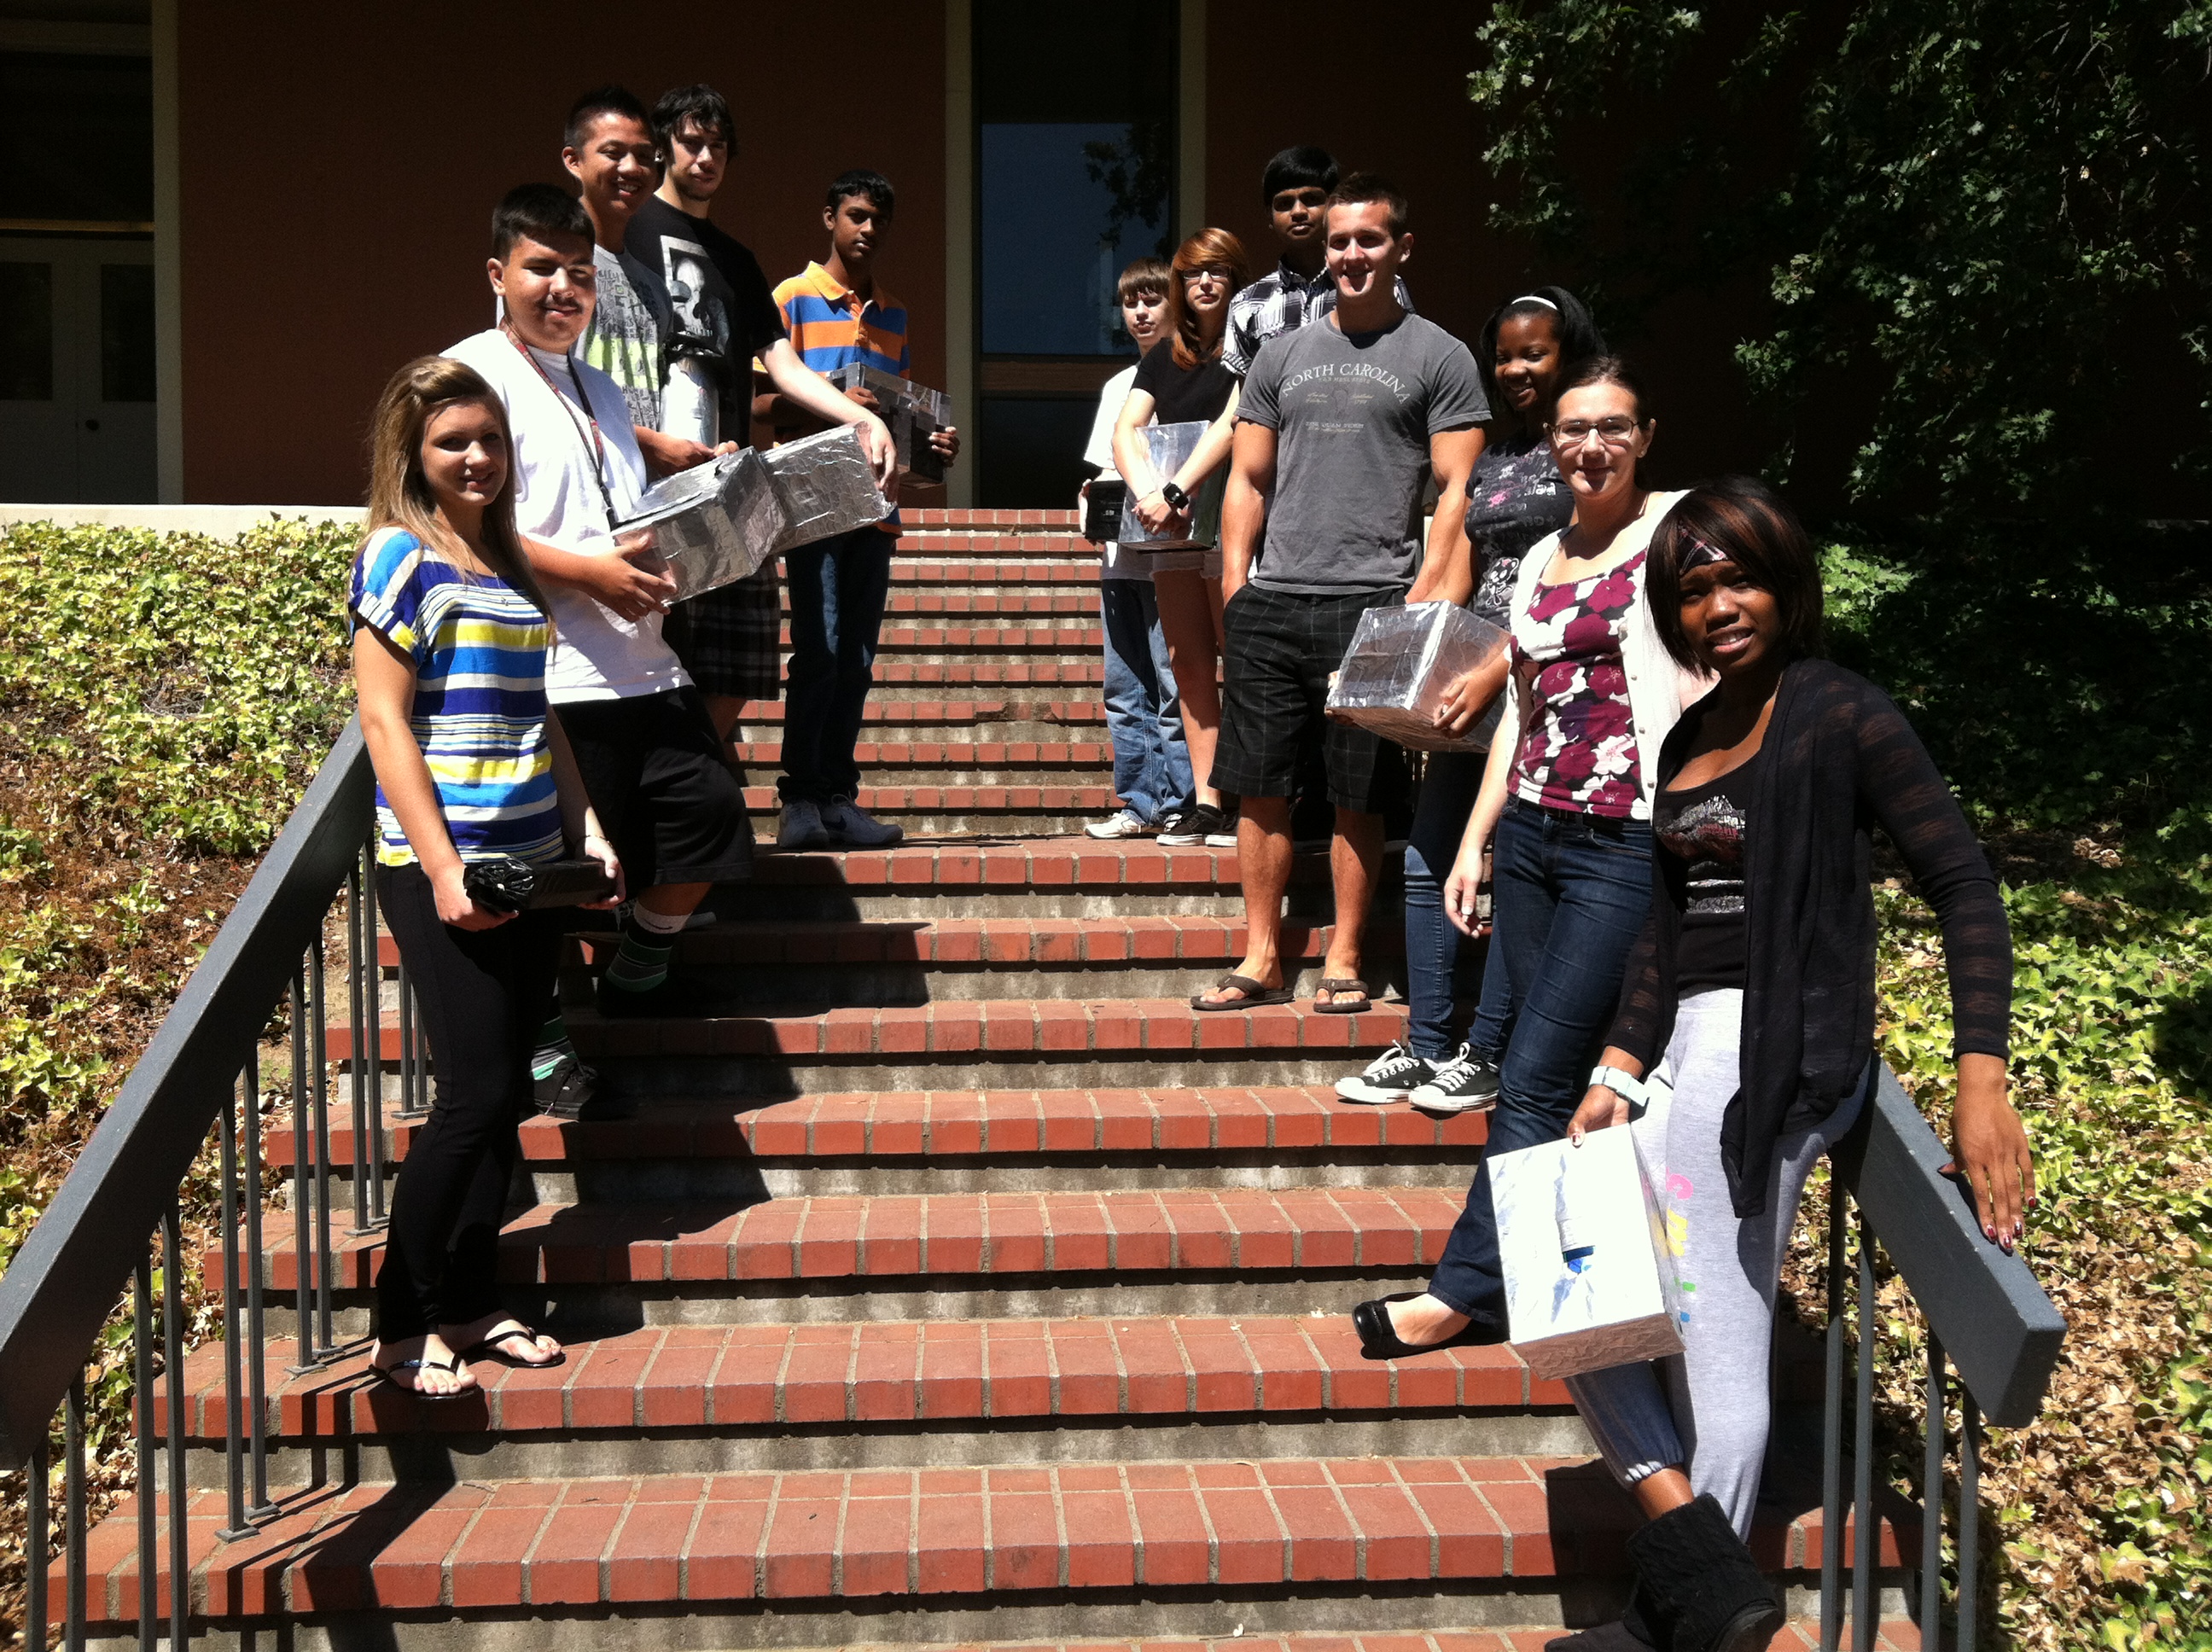 students lined up for group photo on entry steps